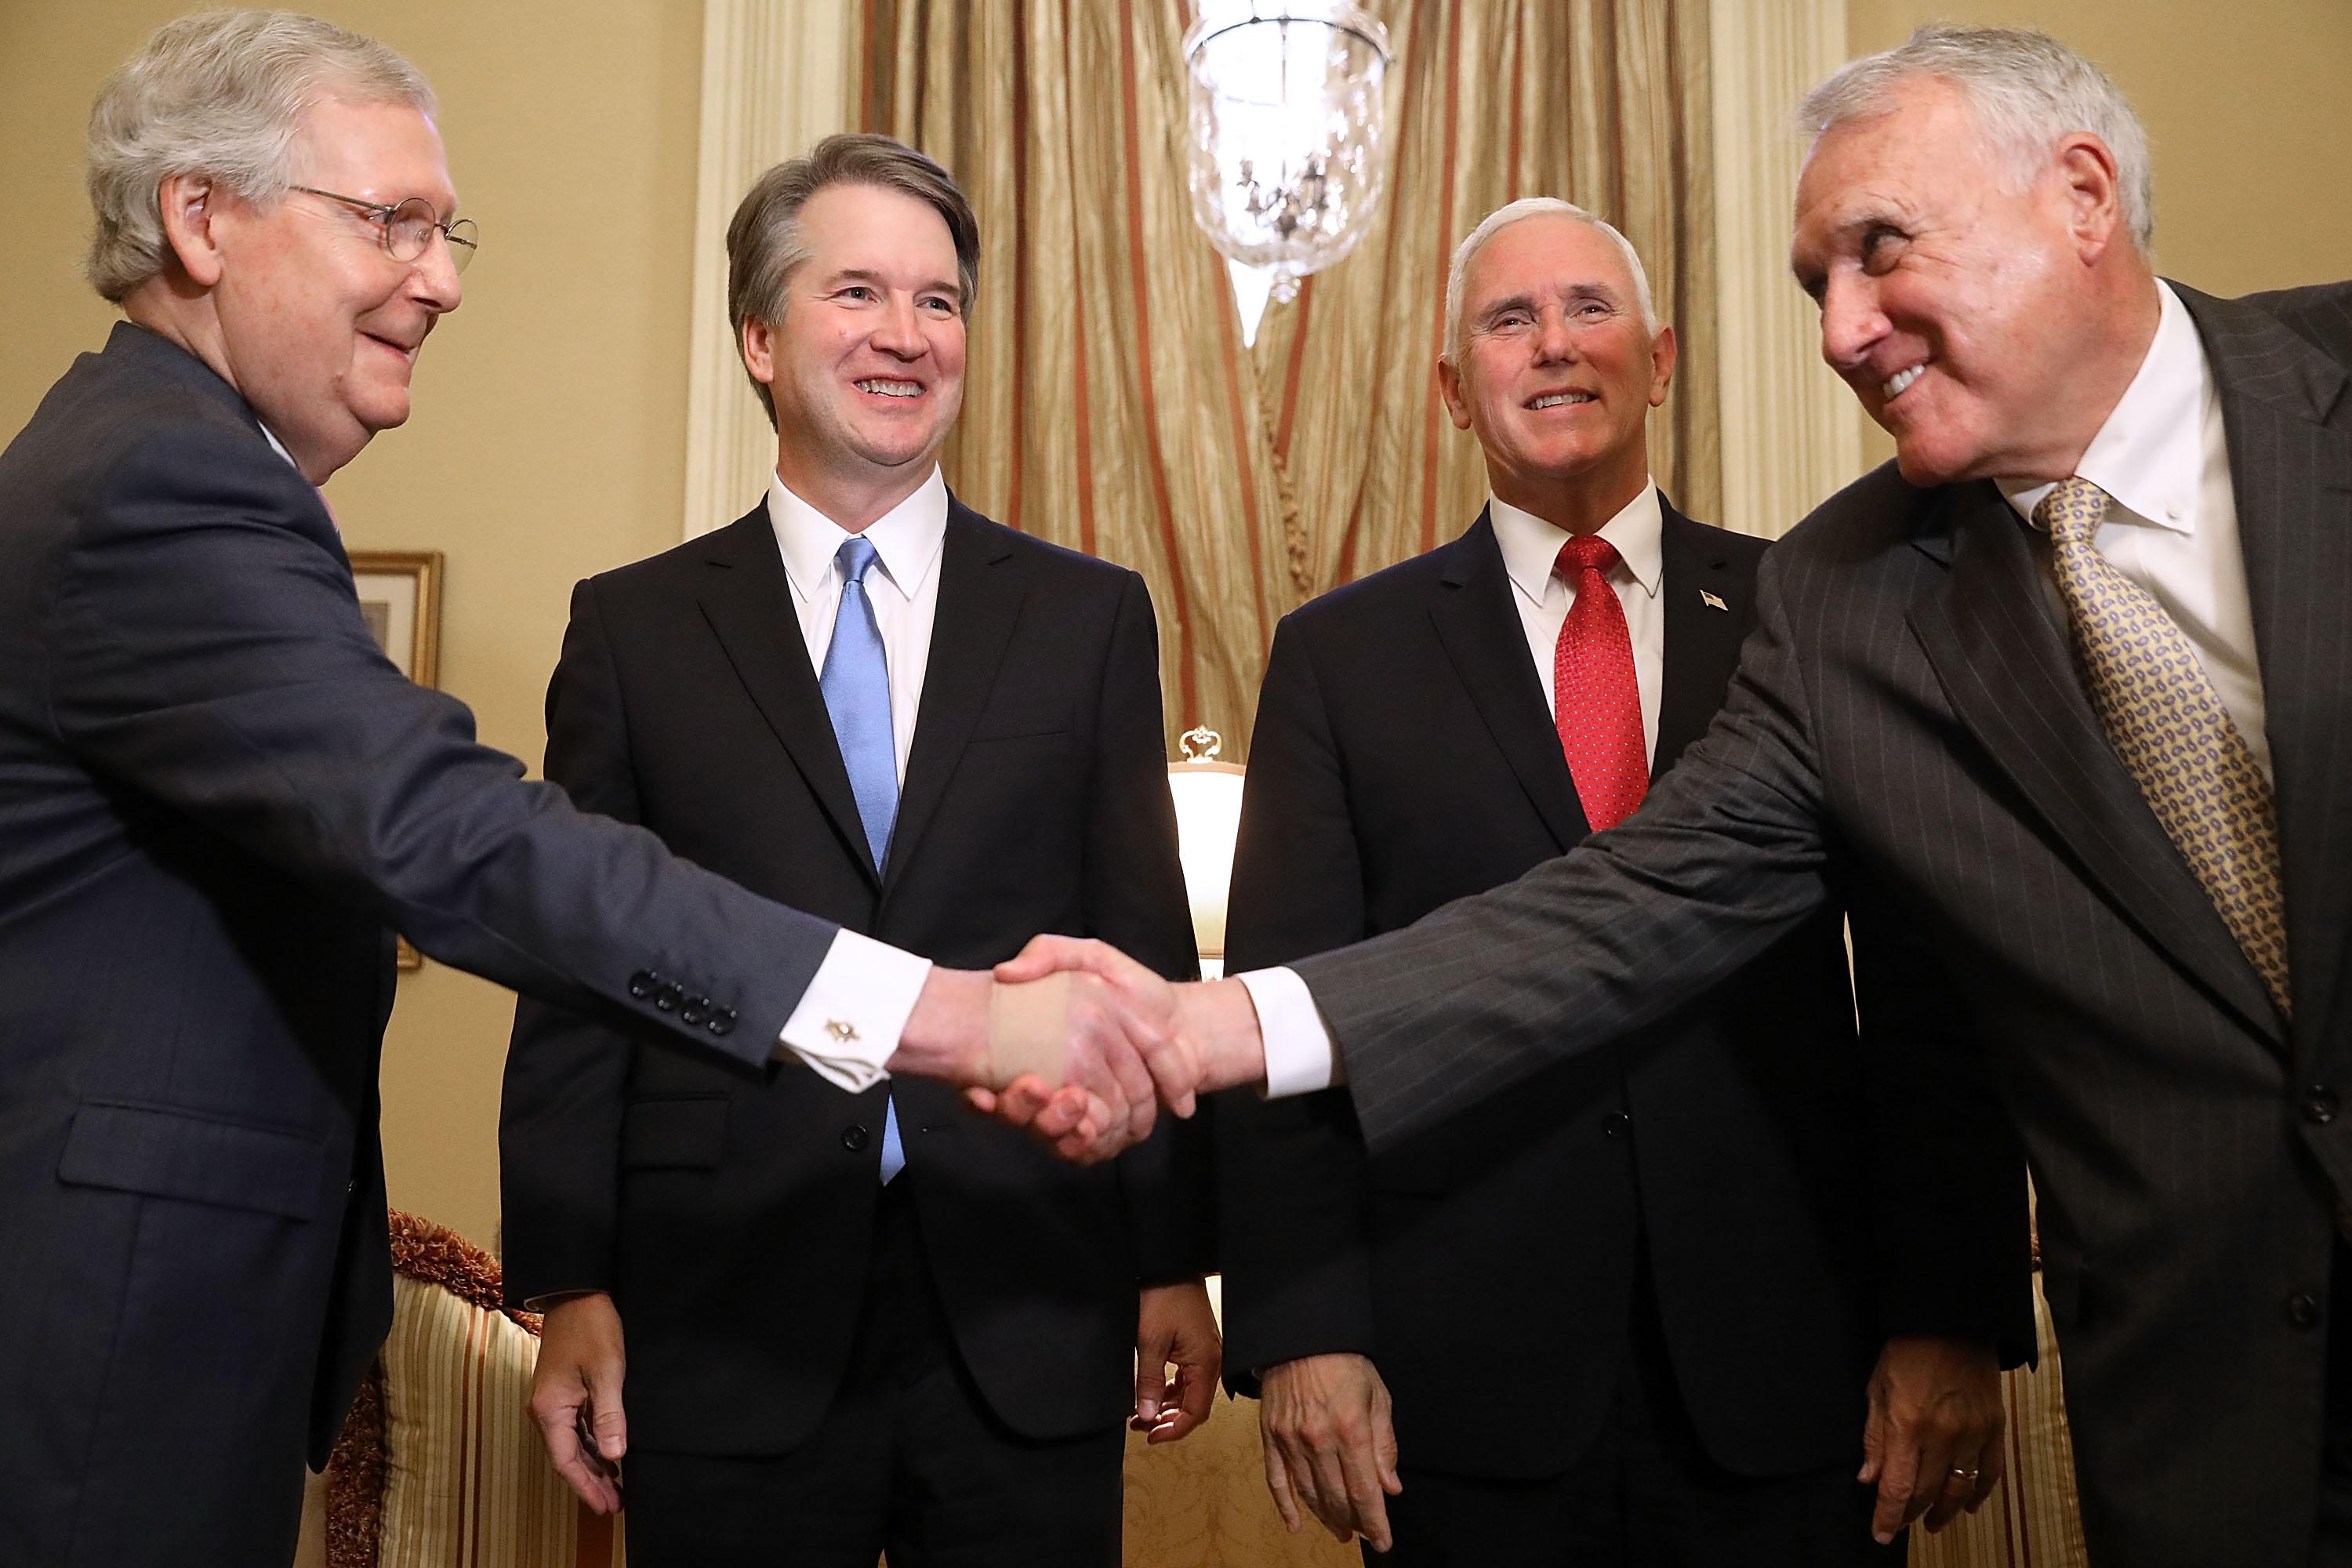 Senate Majority Leader Mitch McConnell, Judge Brett Kavanaugh, Vice President Mike Pence and former Sen. Jon Kyl greet one another before a July 2018 meeting.